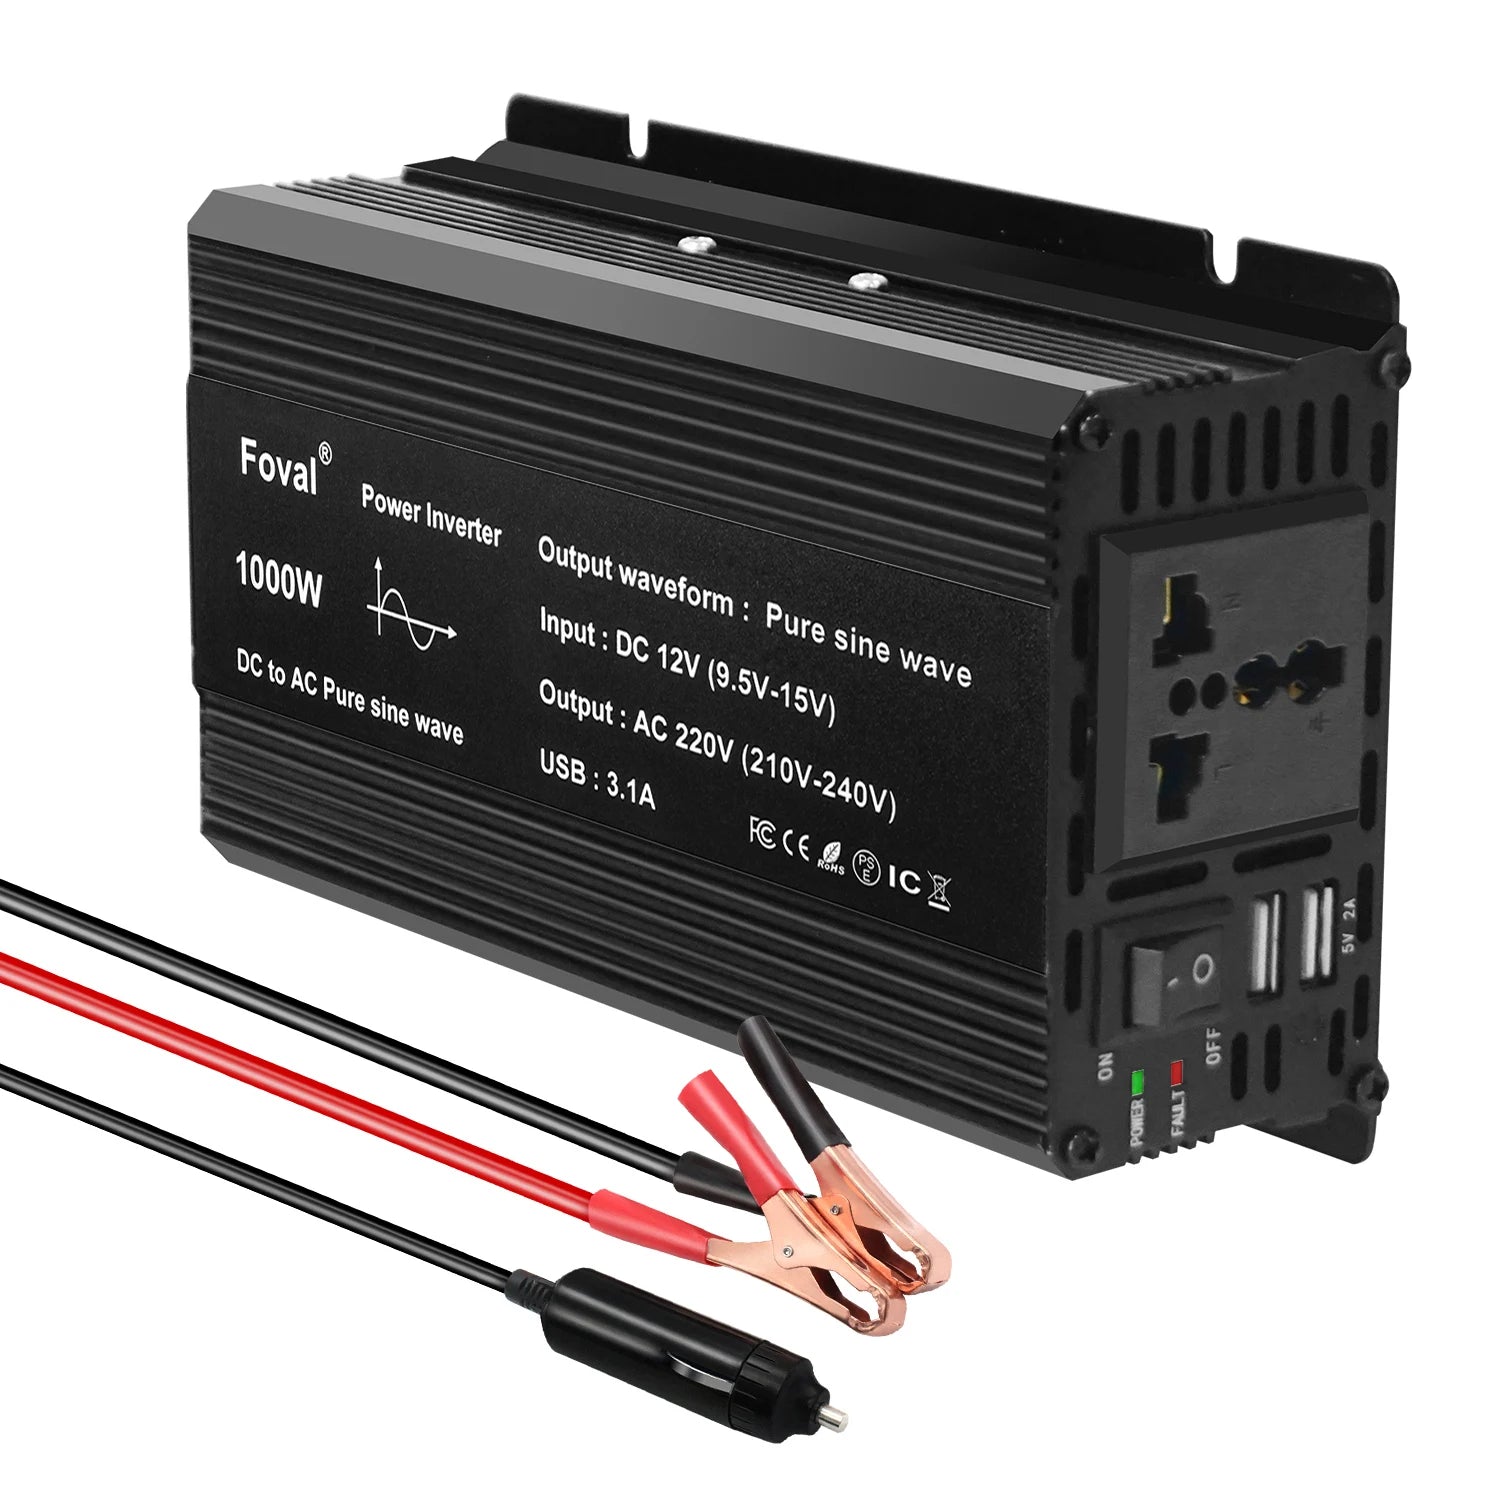 DC 12V to AC 220V Pure Sine Wave Inverter, Foval DC/AC Inverter with pure sine wave output, customizable power from 1-200KW, and various specifications.